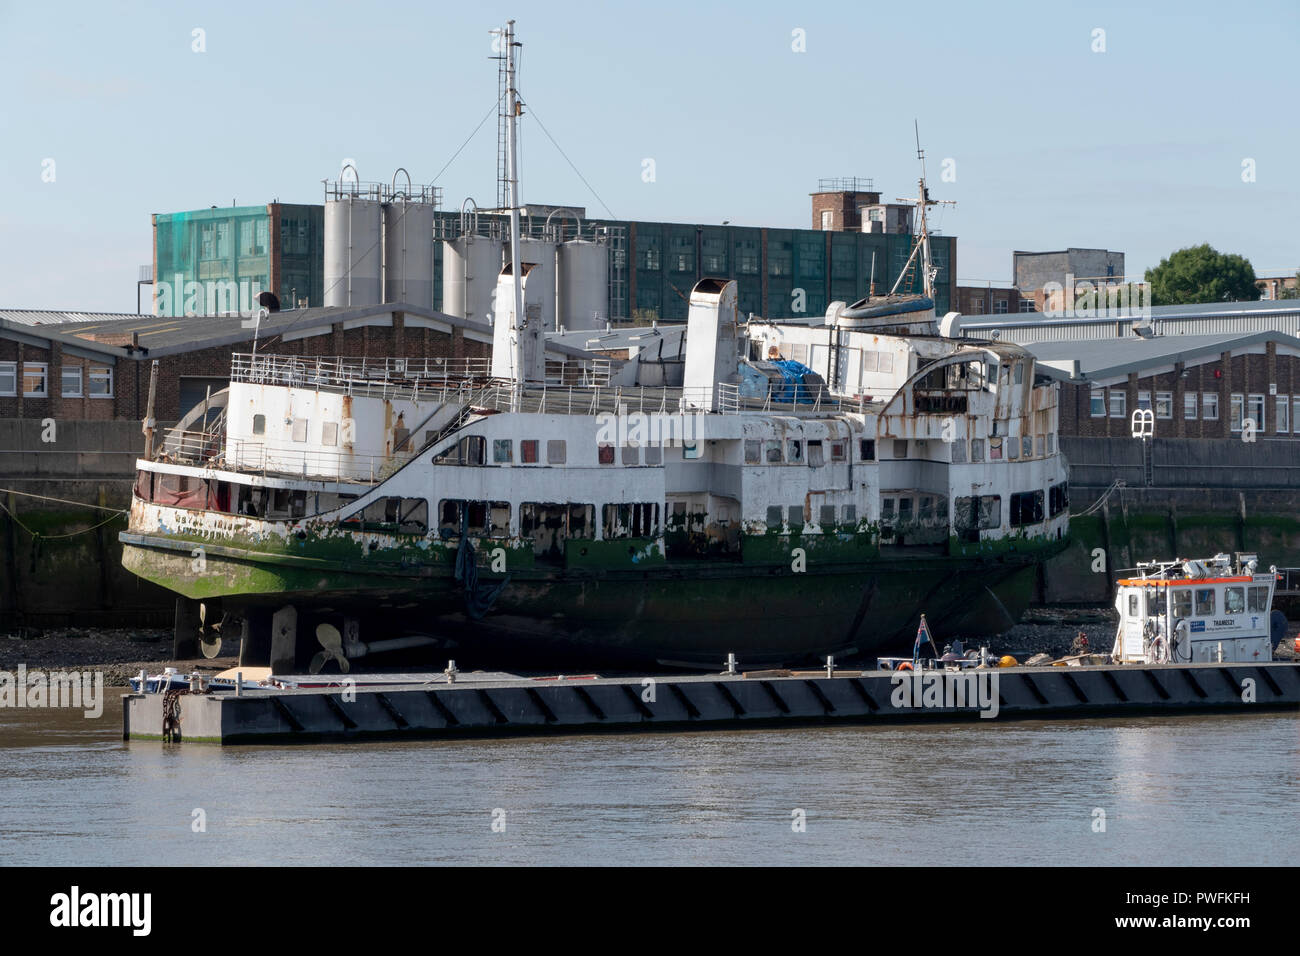 The Royal Iris ship. One of the Liverpool Mersey Ferries now docked on the River Thames, London. Plans are being made to convert it to a restaurant. Stock Photo